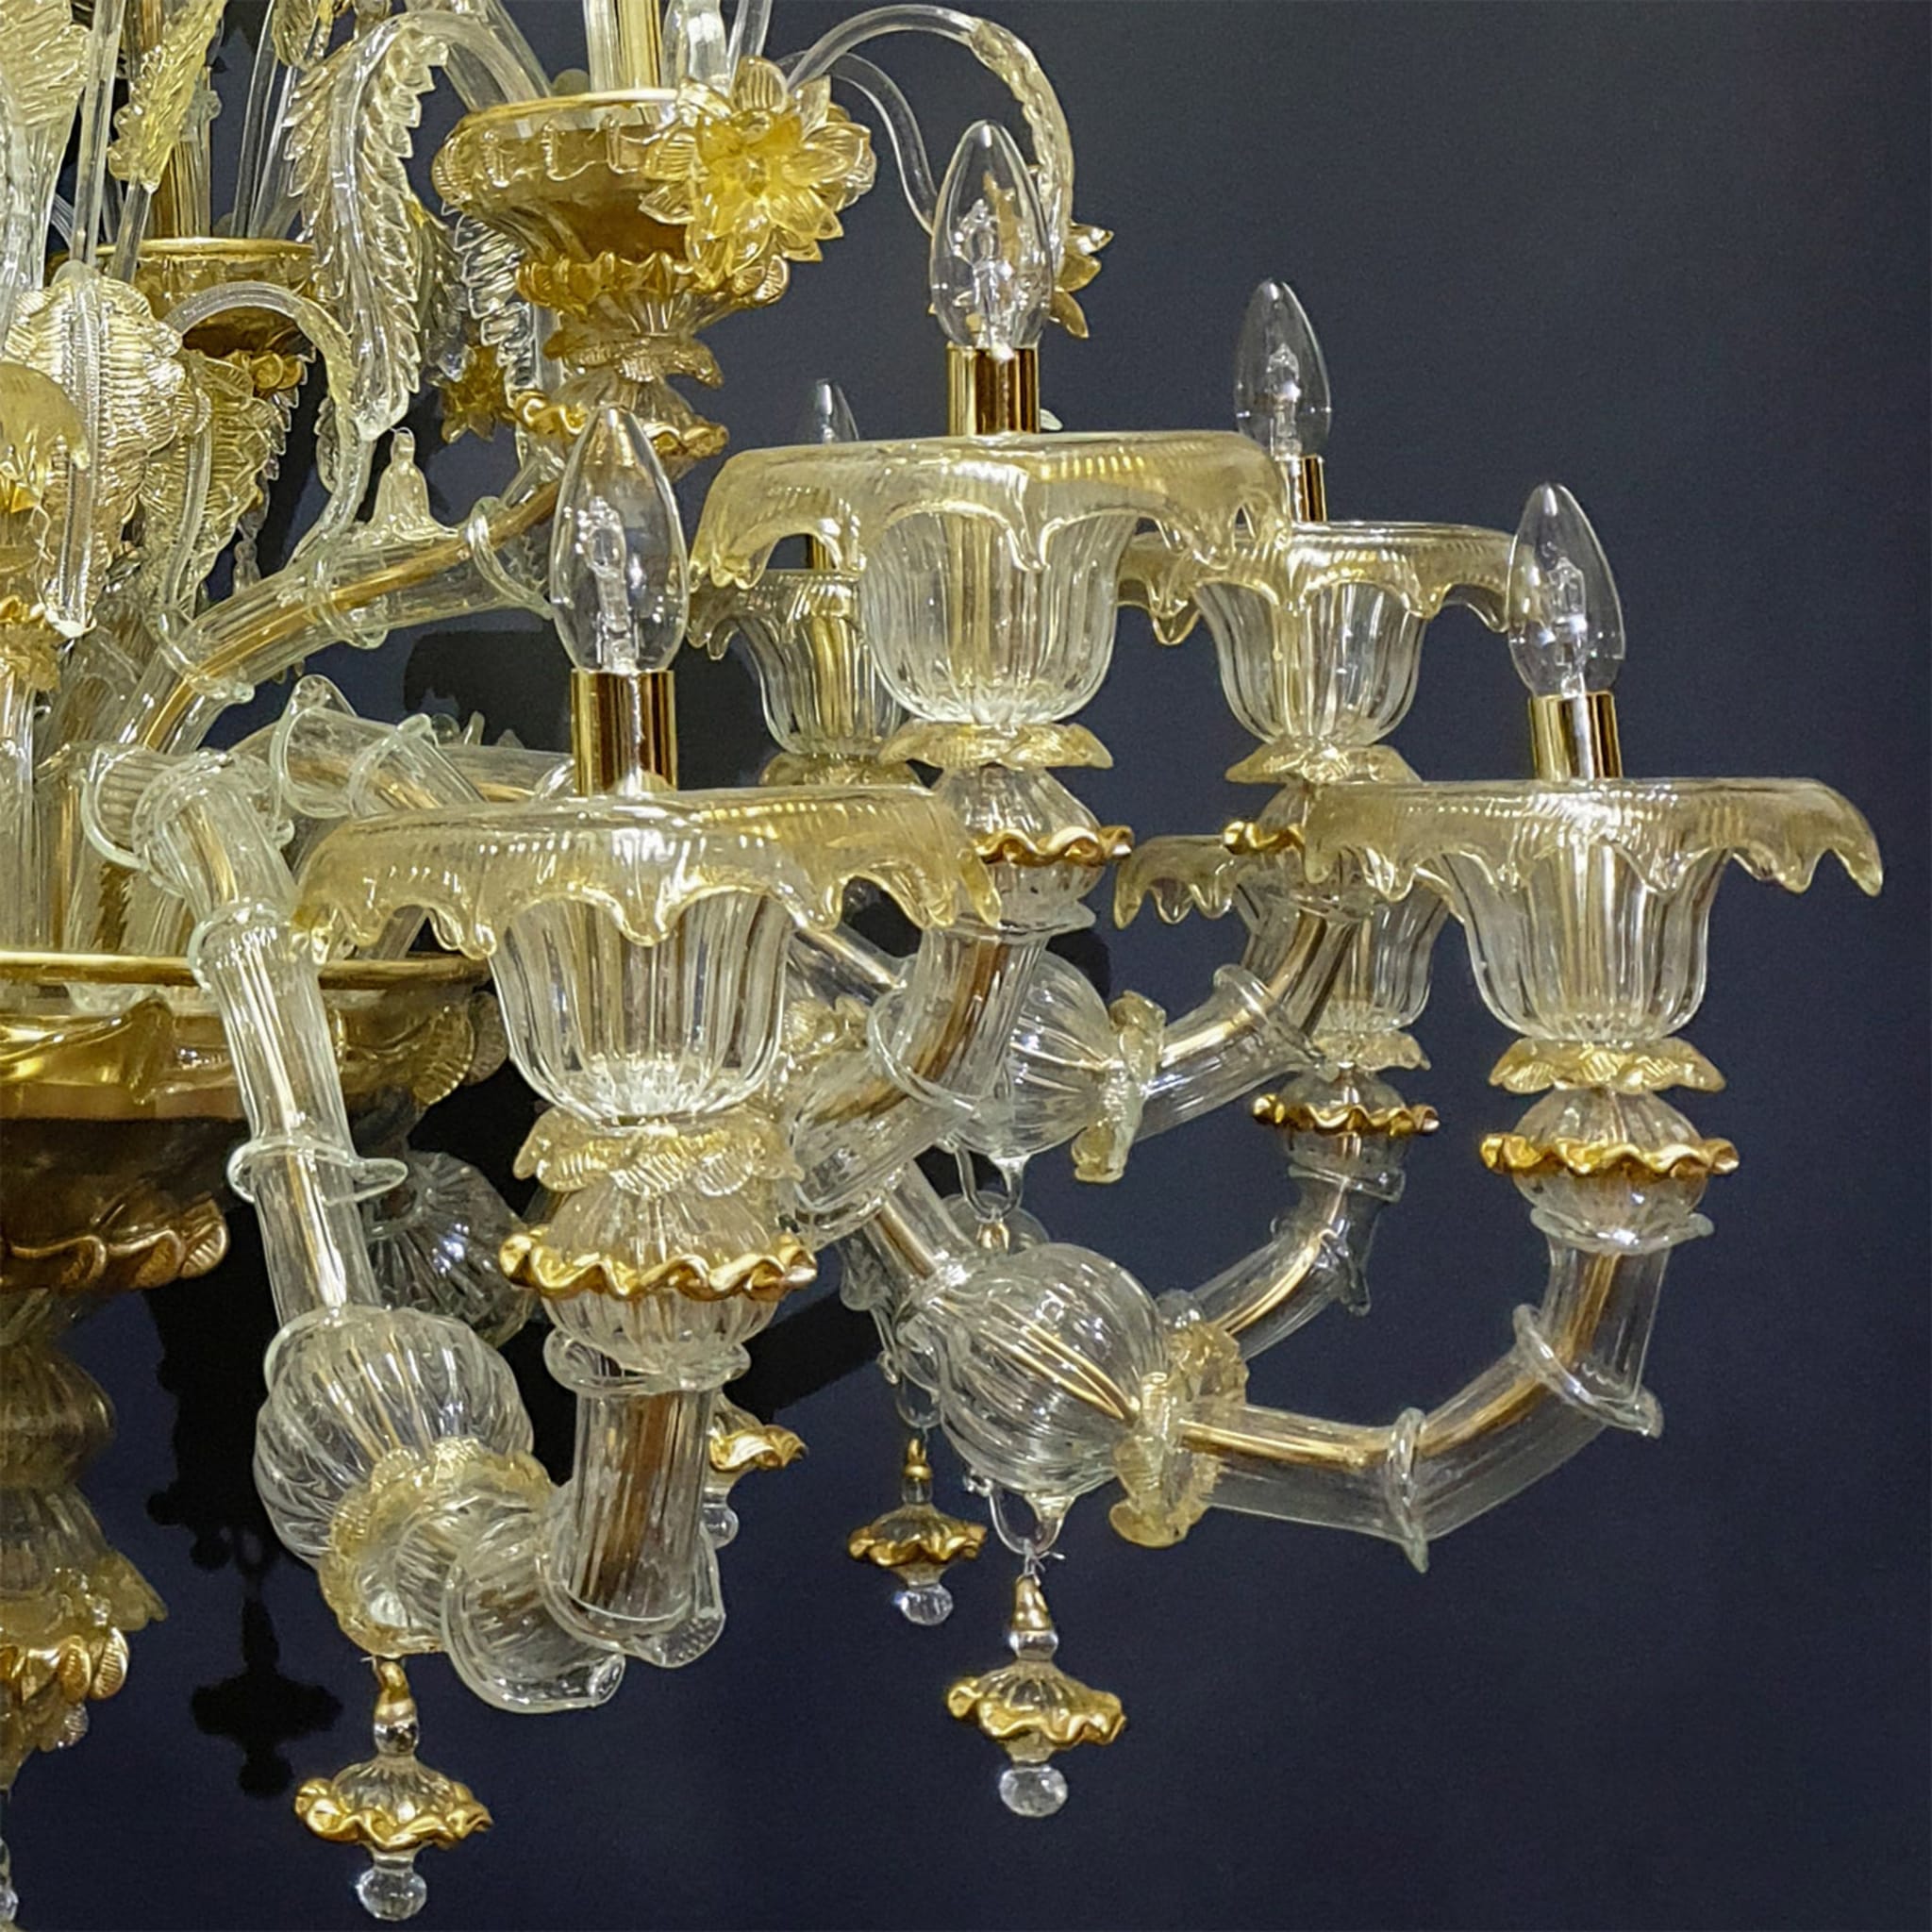 Rezzonico-style Gold and Crystal Chandelier #3 - Alternative view 3